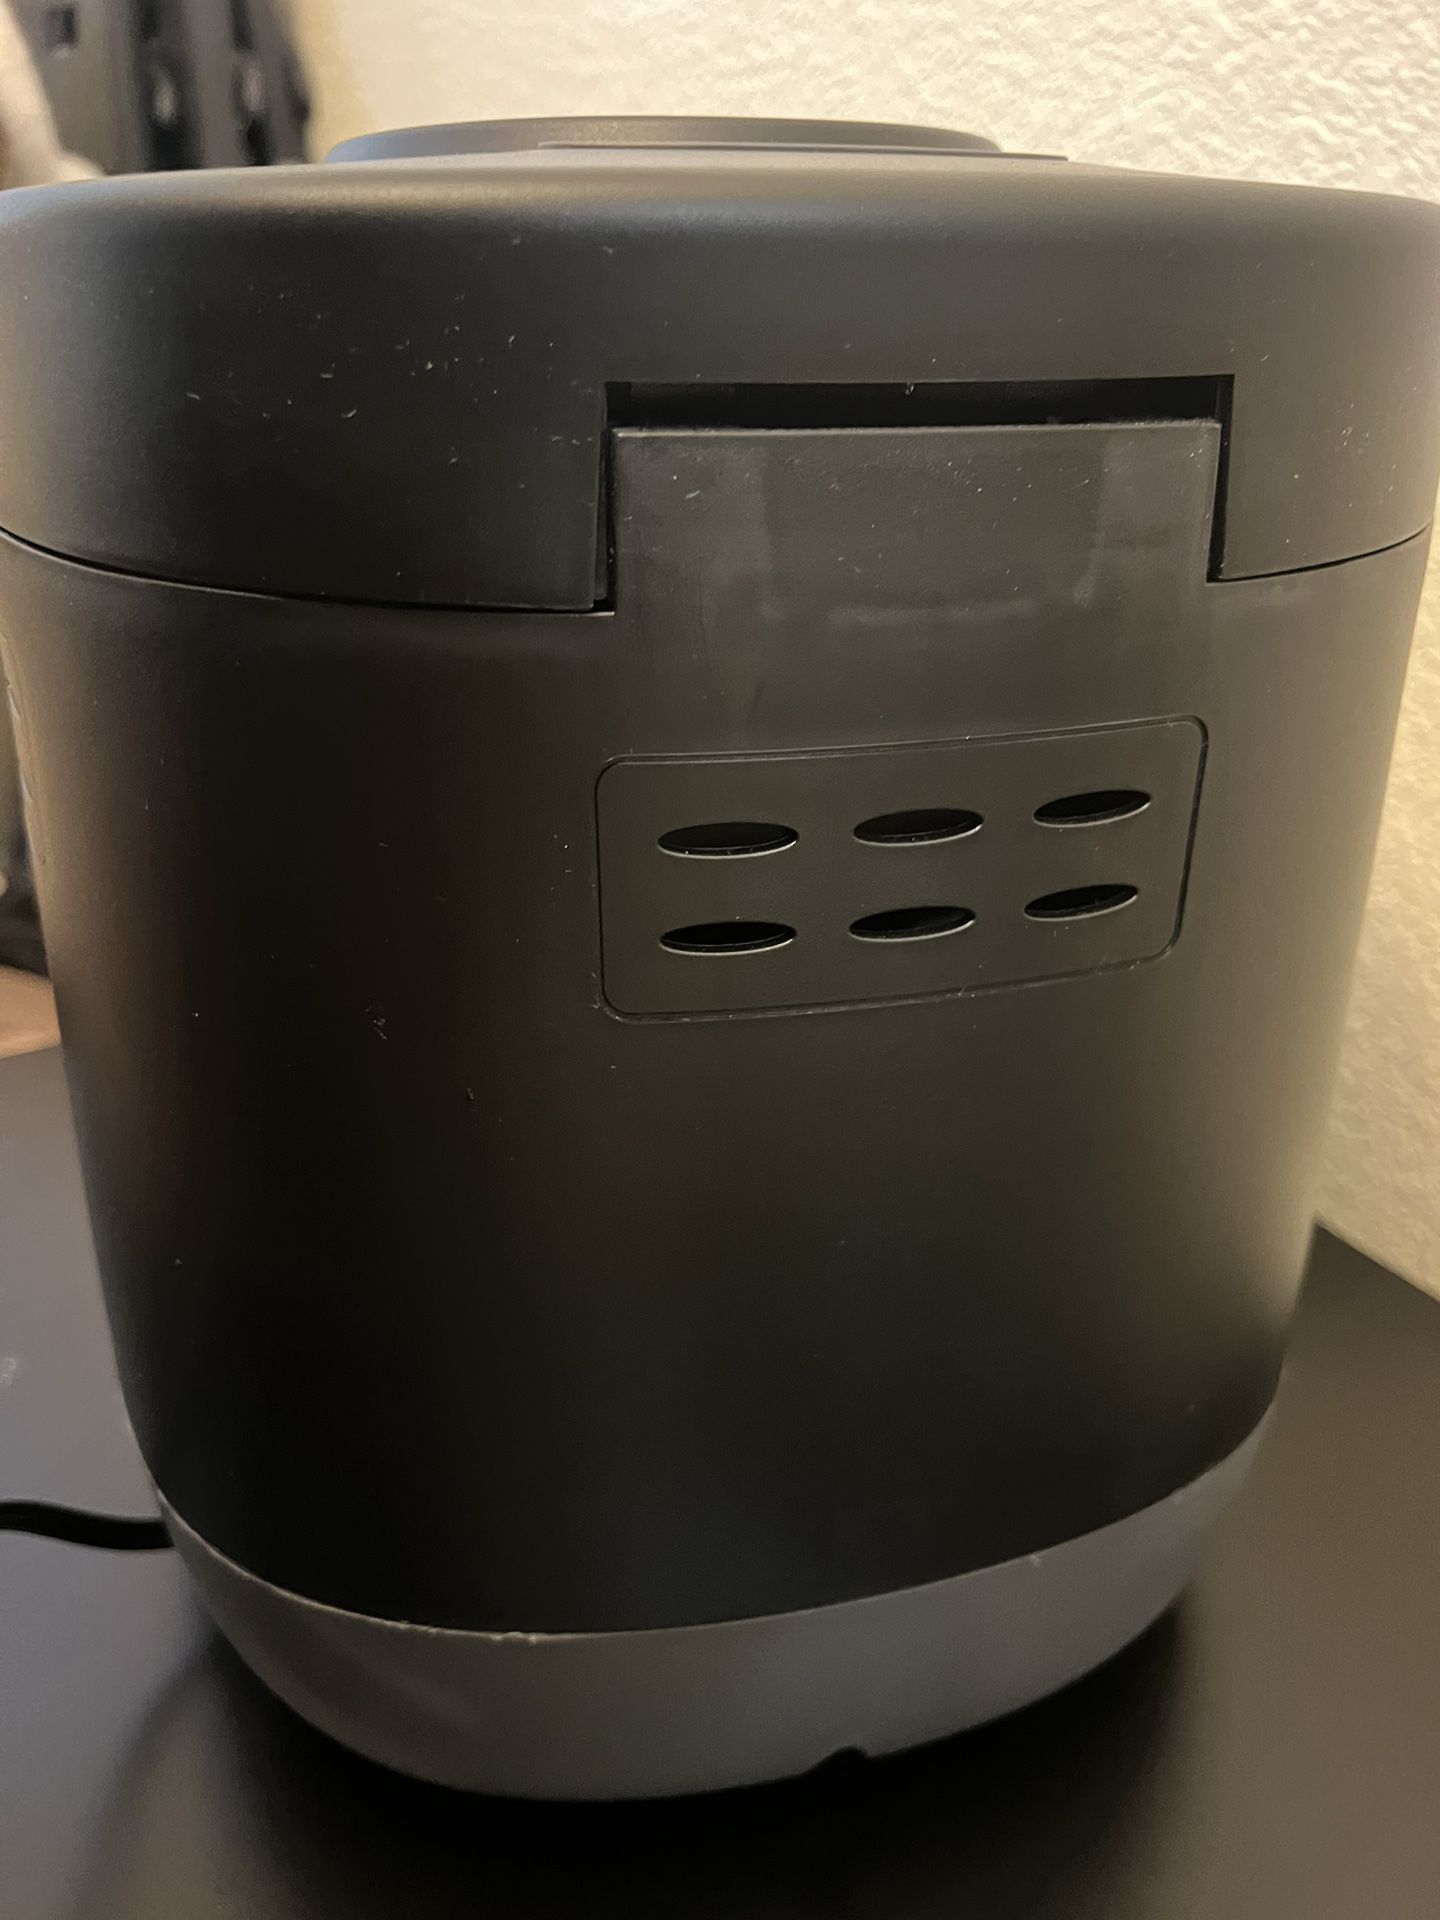 Bread Maker, Hamilton Beach for Sale in City Of Industry, CA - OfferUp